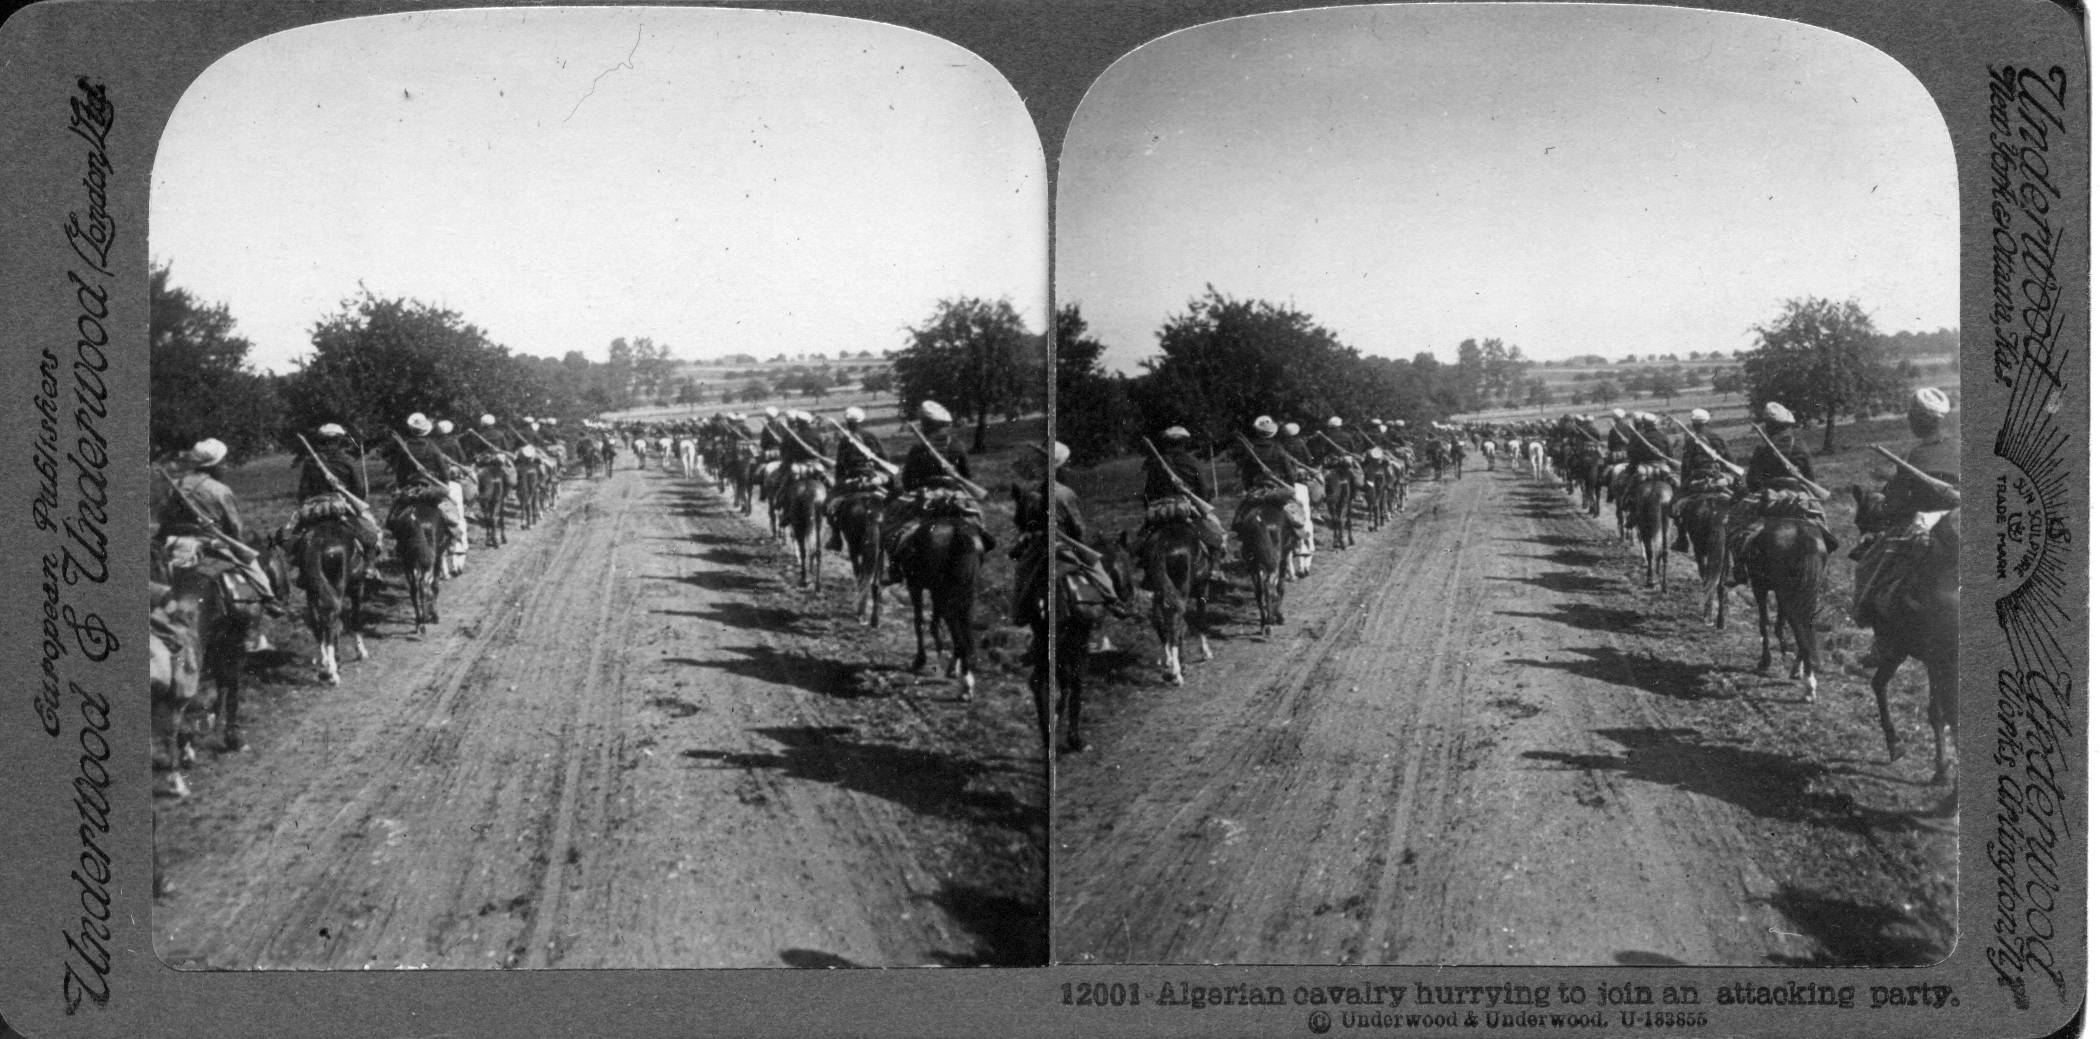 Algerian cavalry hurrying to join an attacking party